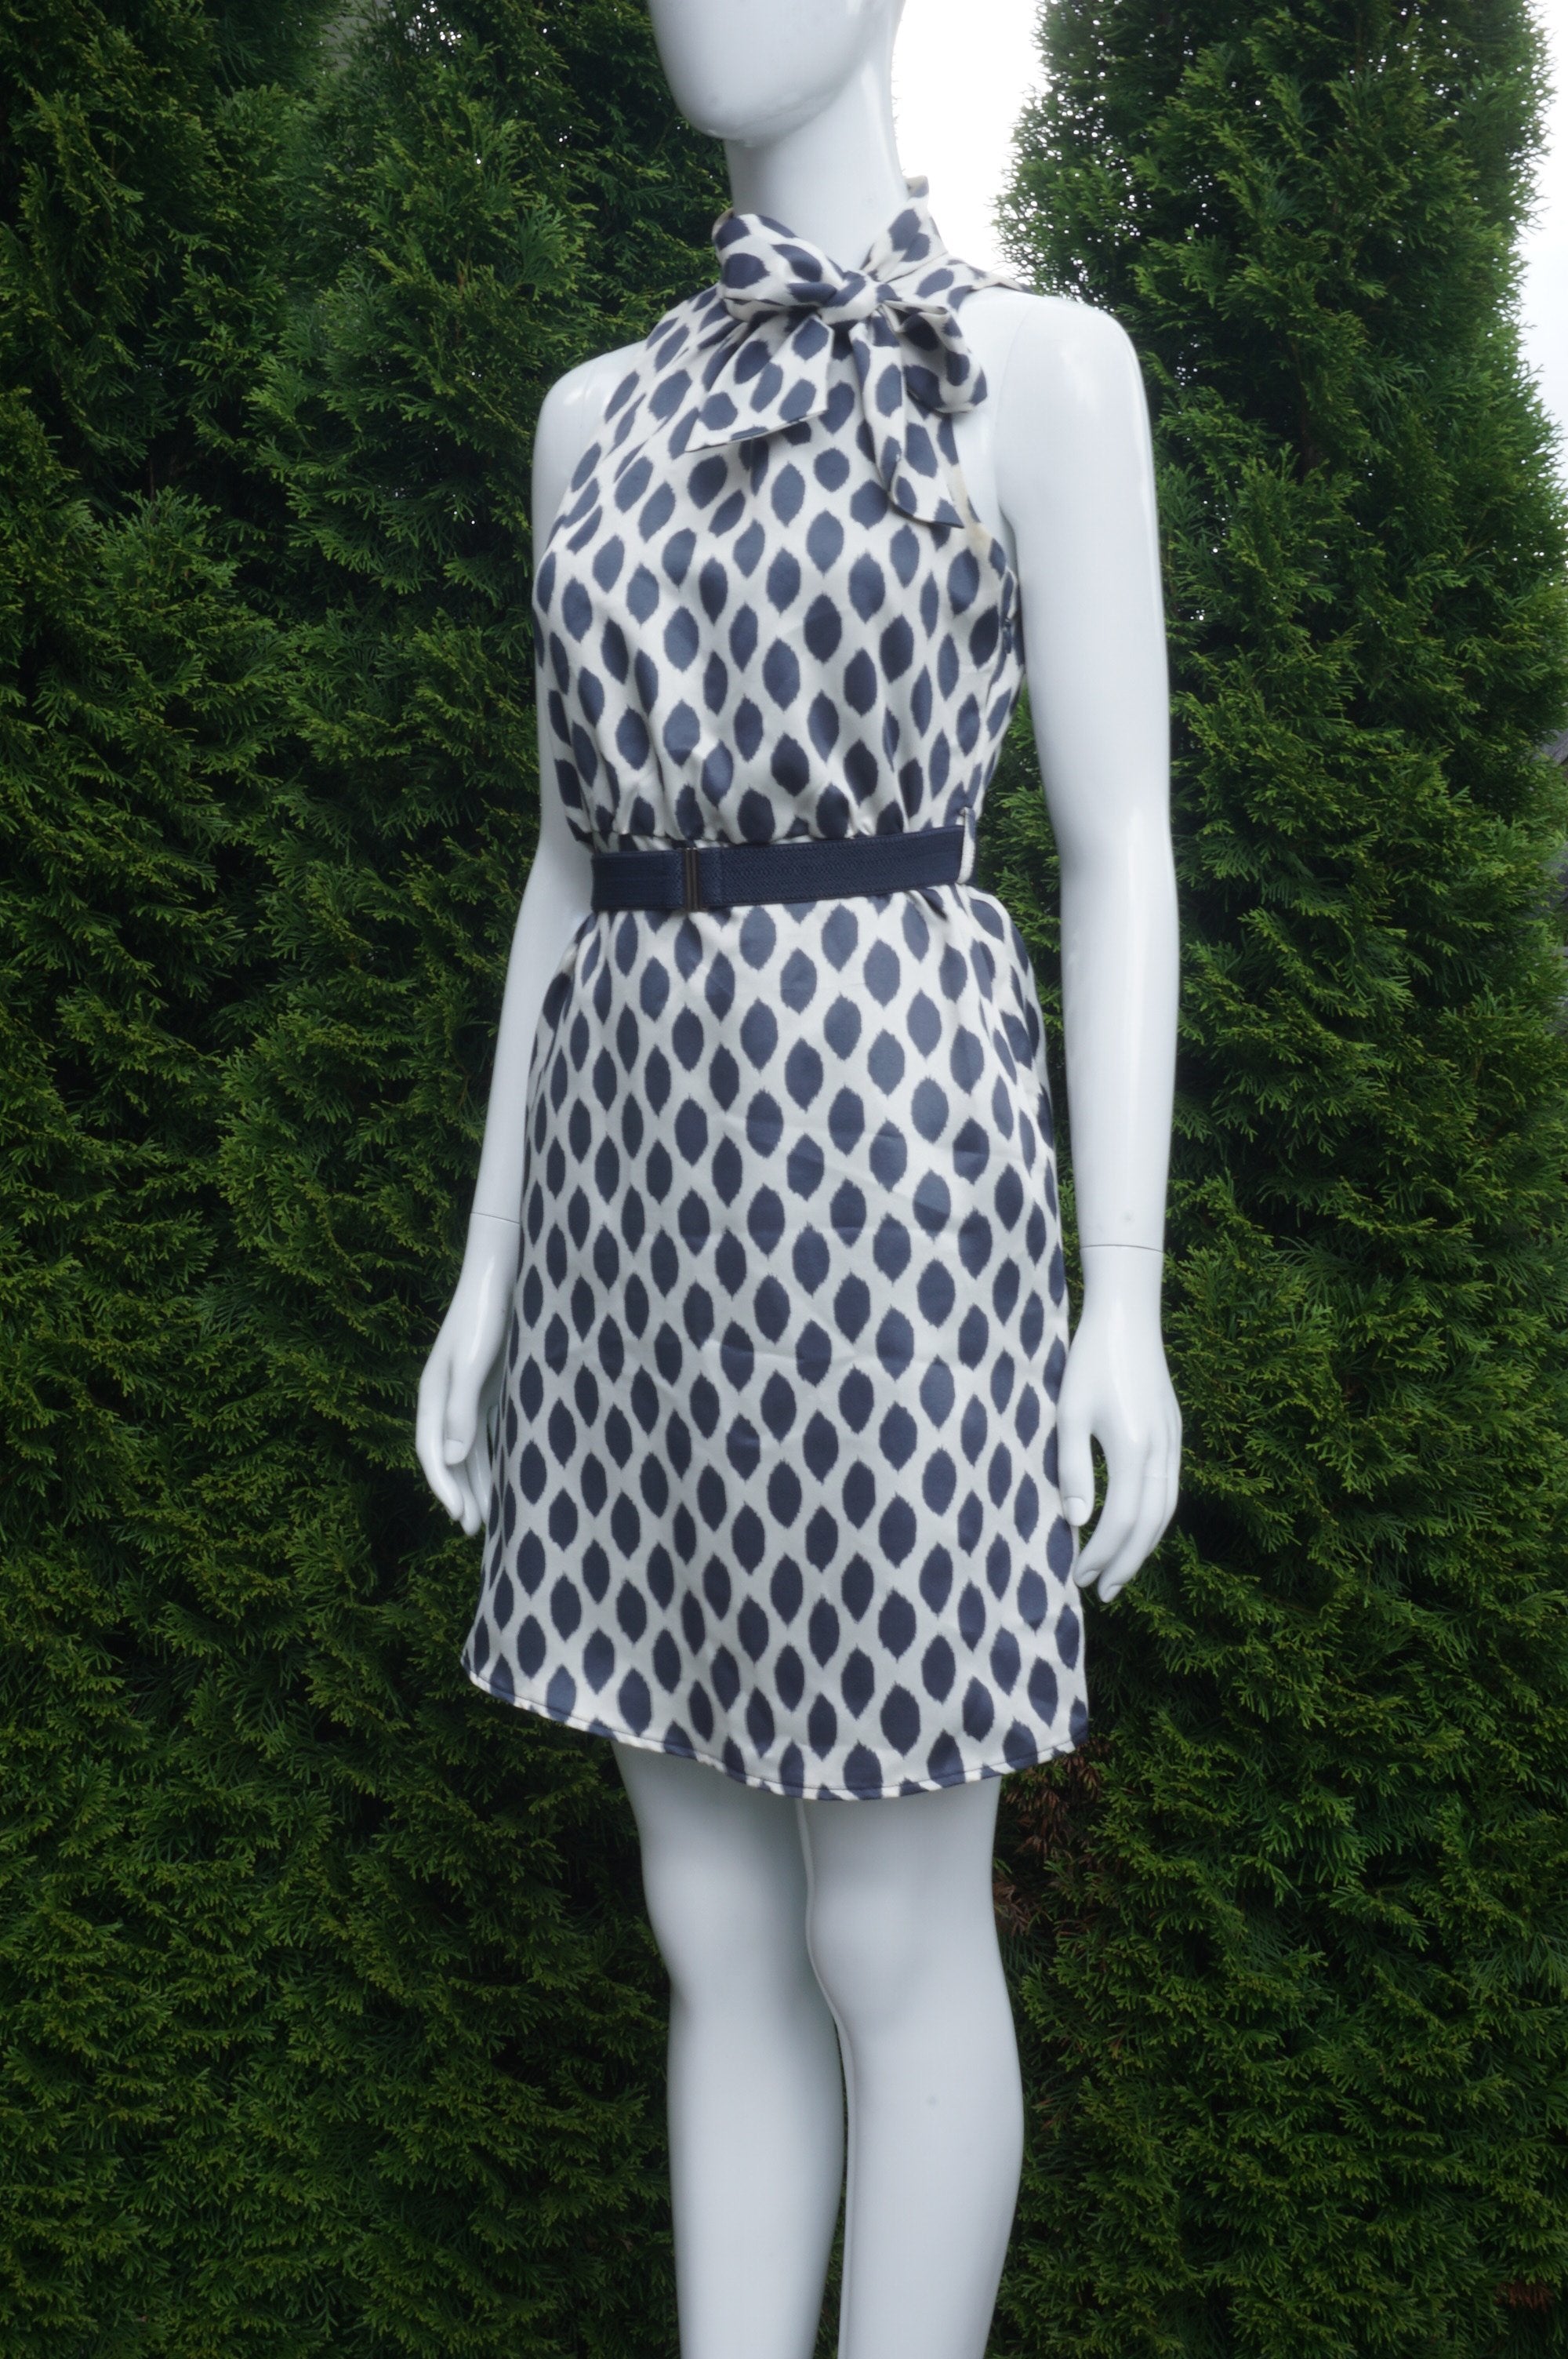 Love 21 Polka Dot Sleeveless Dress with Neck Tie, Zipper on the side. Bust 34 inches, waist 28 inches. Length 35 inches., White, Blue, Shell and lining: 100% Polyester, women's Dresses & Rompers, women's White, Blue Dresses & Rompers, Love 21 women's Dresses & Rompers, polka dot dress, sleeveless dress, neck tie dress